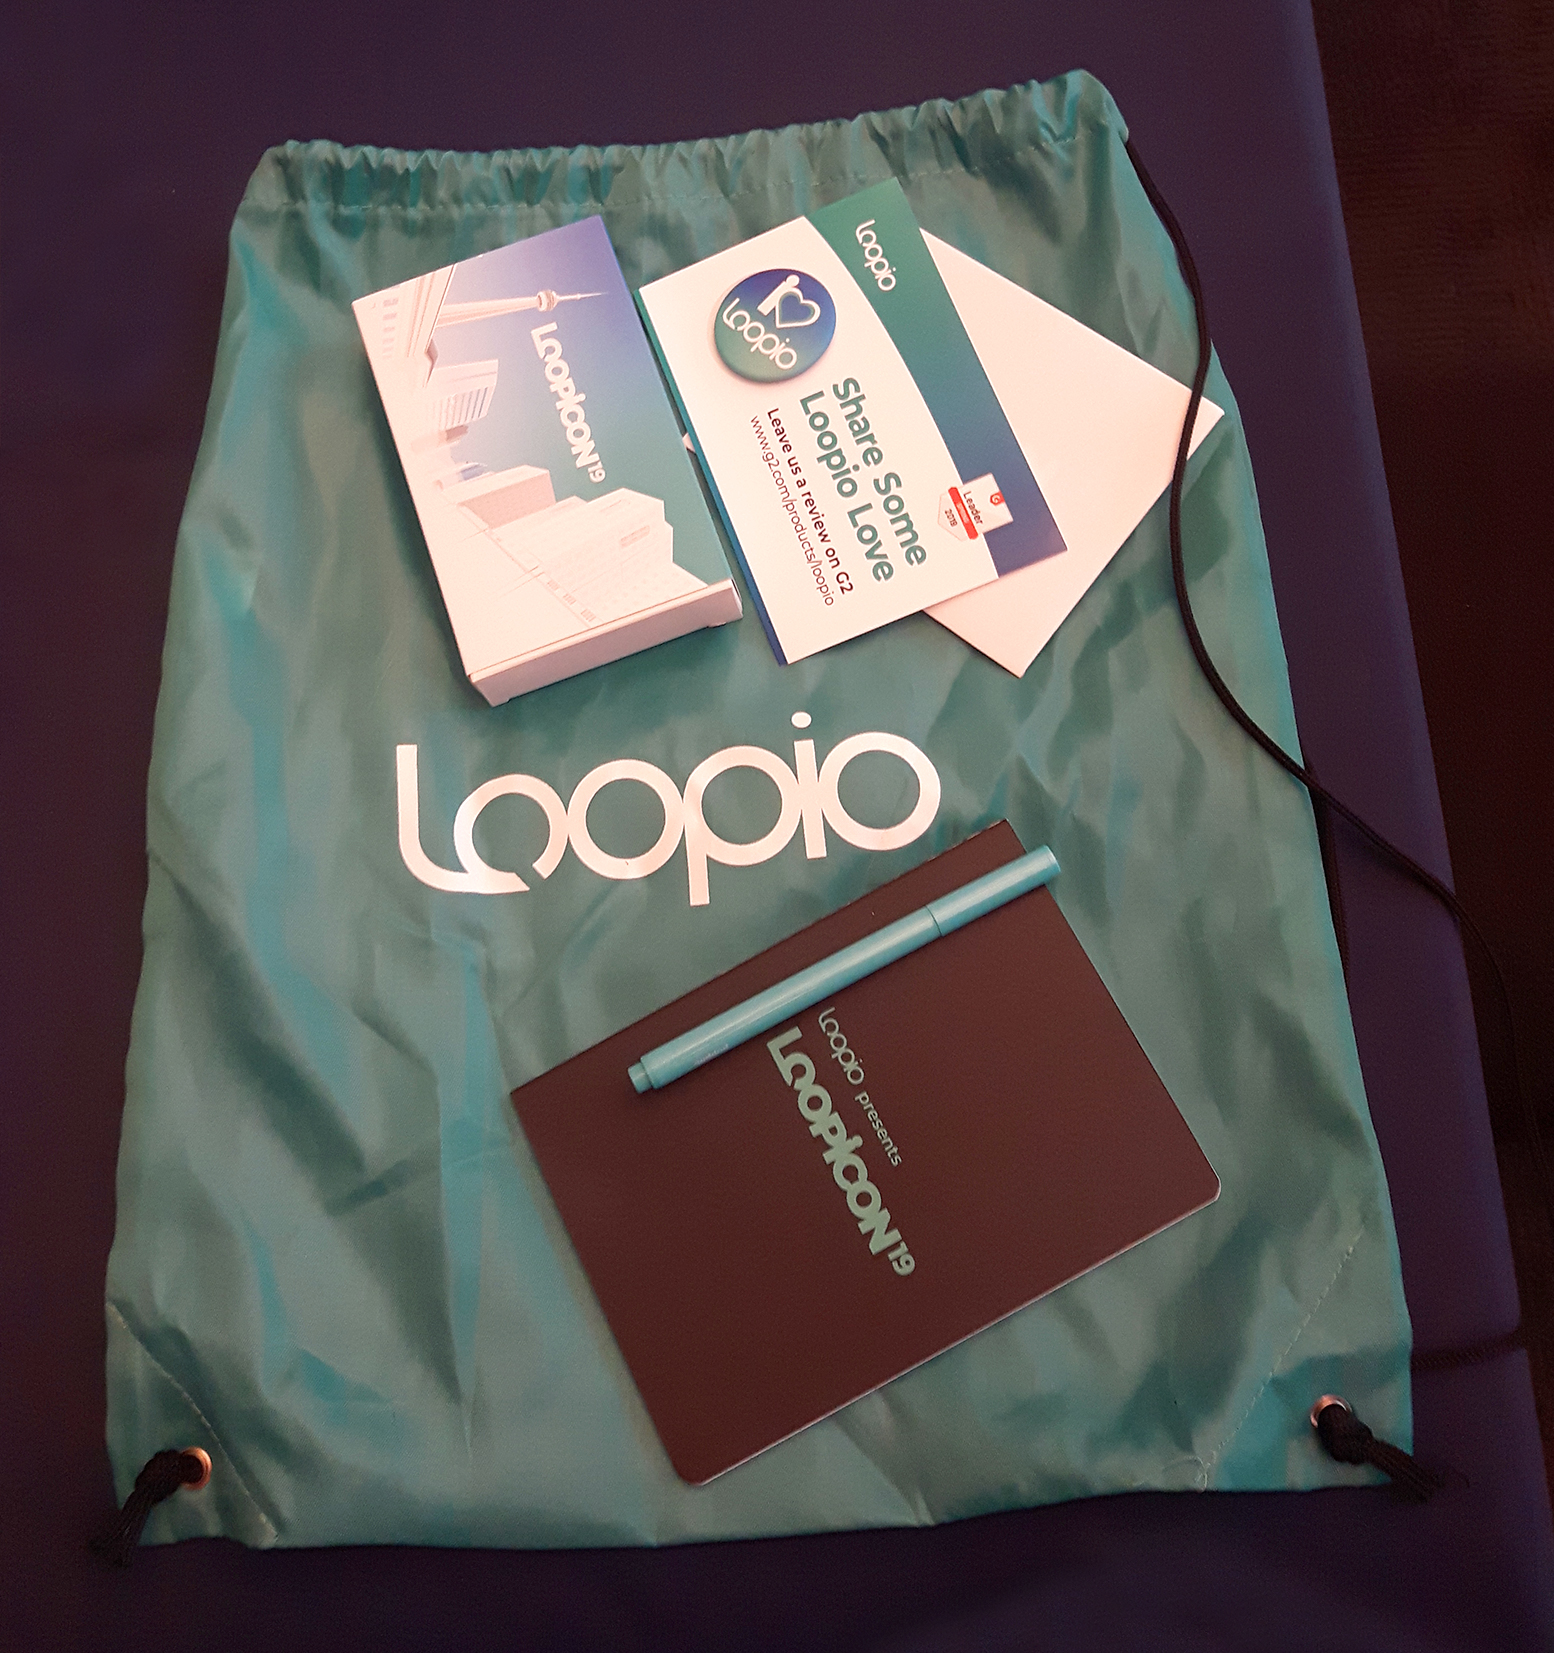 Various conference swag items laid out on a table